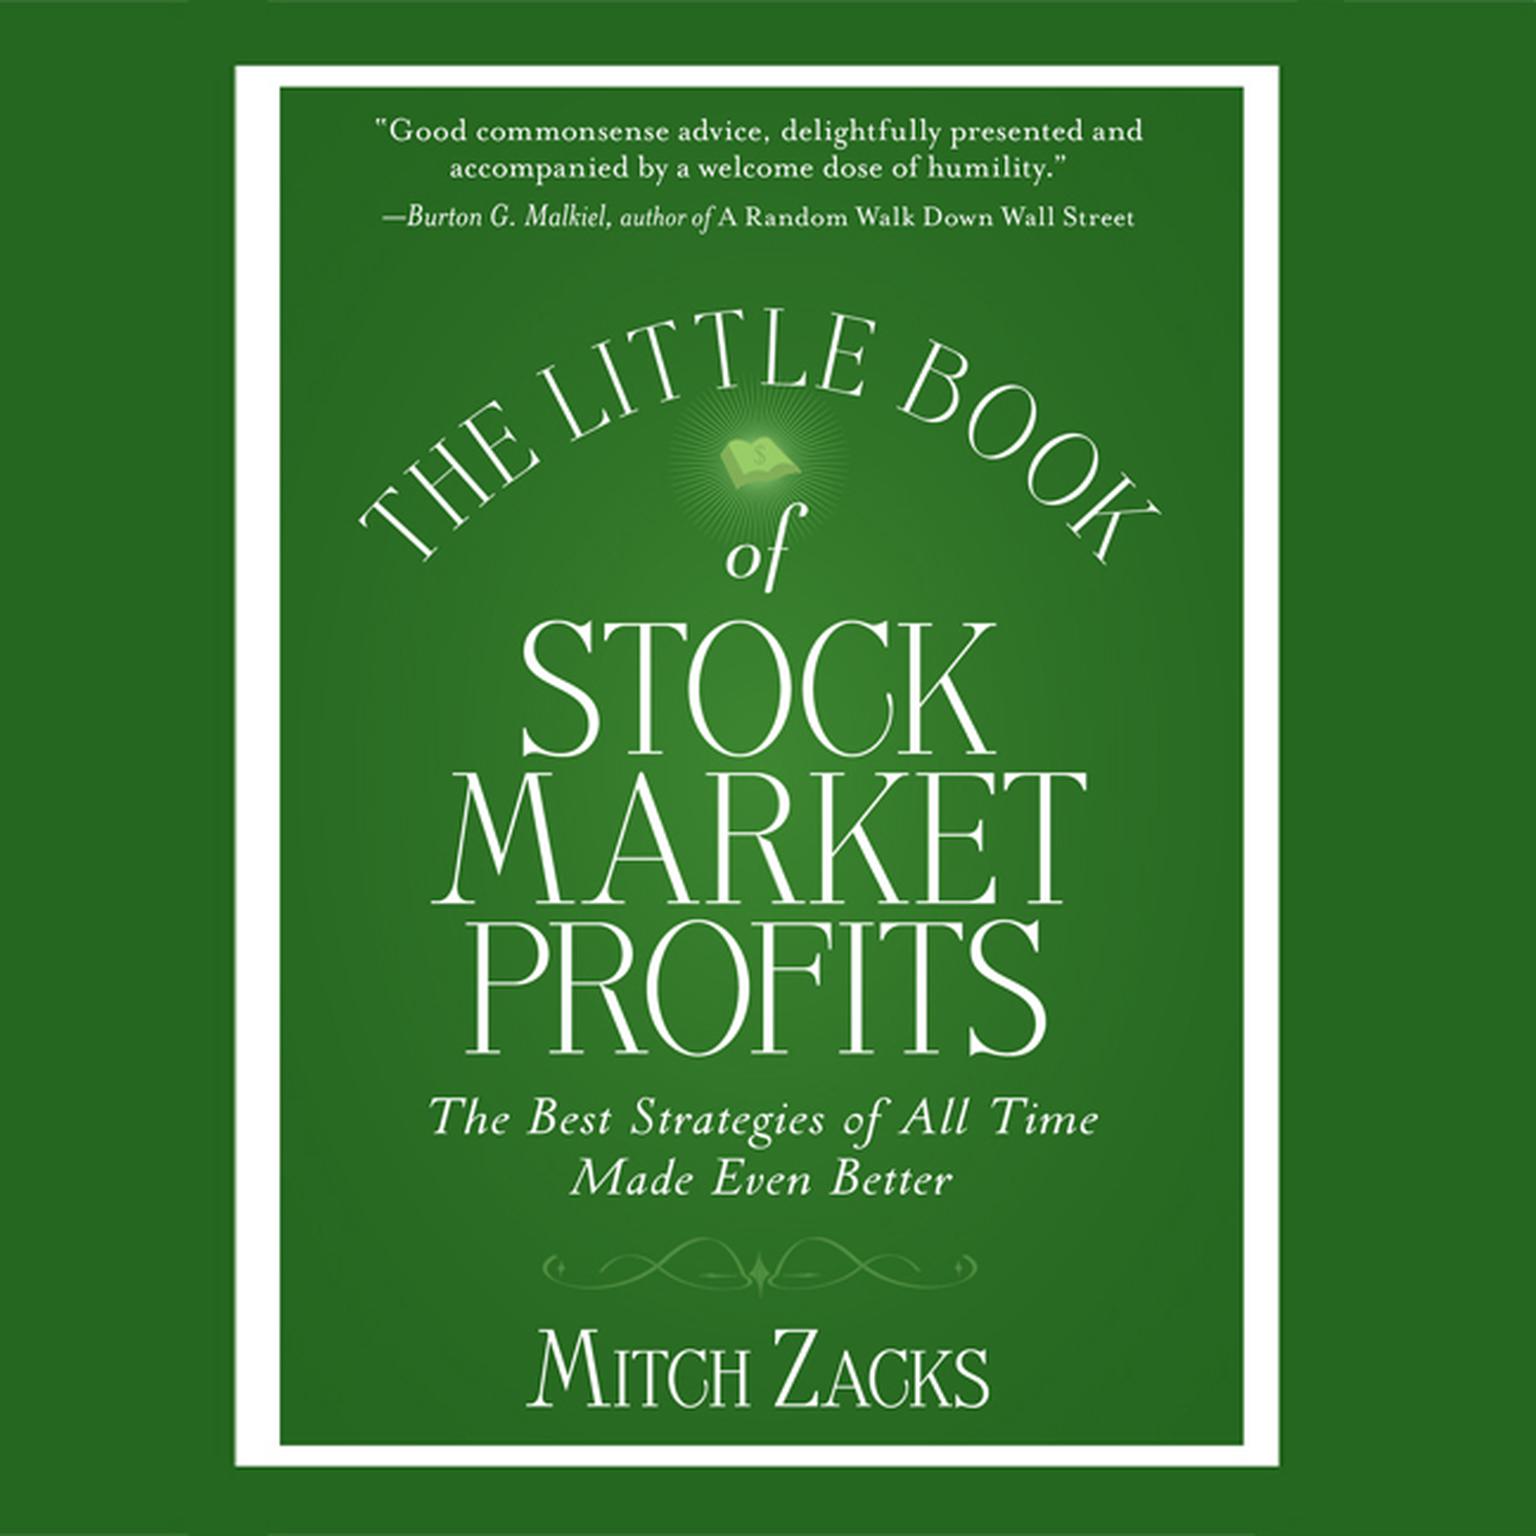 The Little Book Of Stock Market Profits: The Best Strategies of All Time Made Even Better Audiobook, by Mitch Zacks